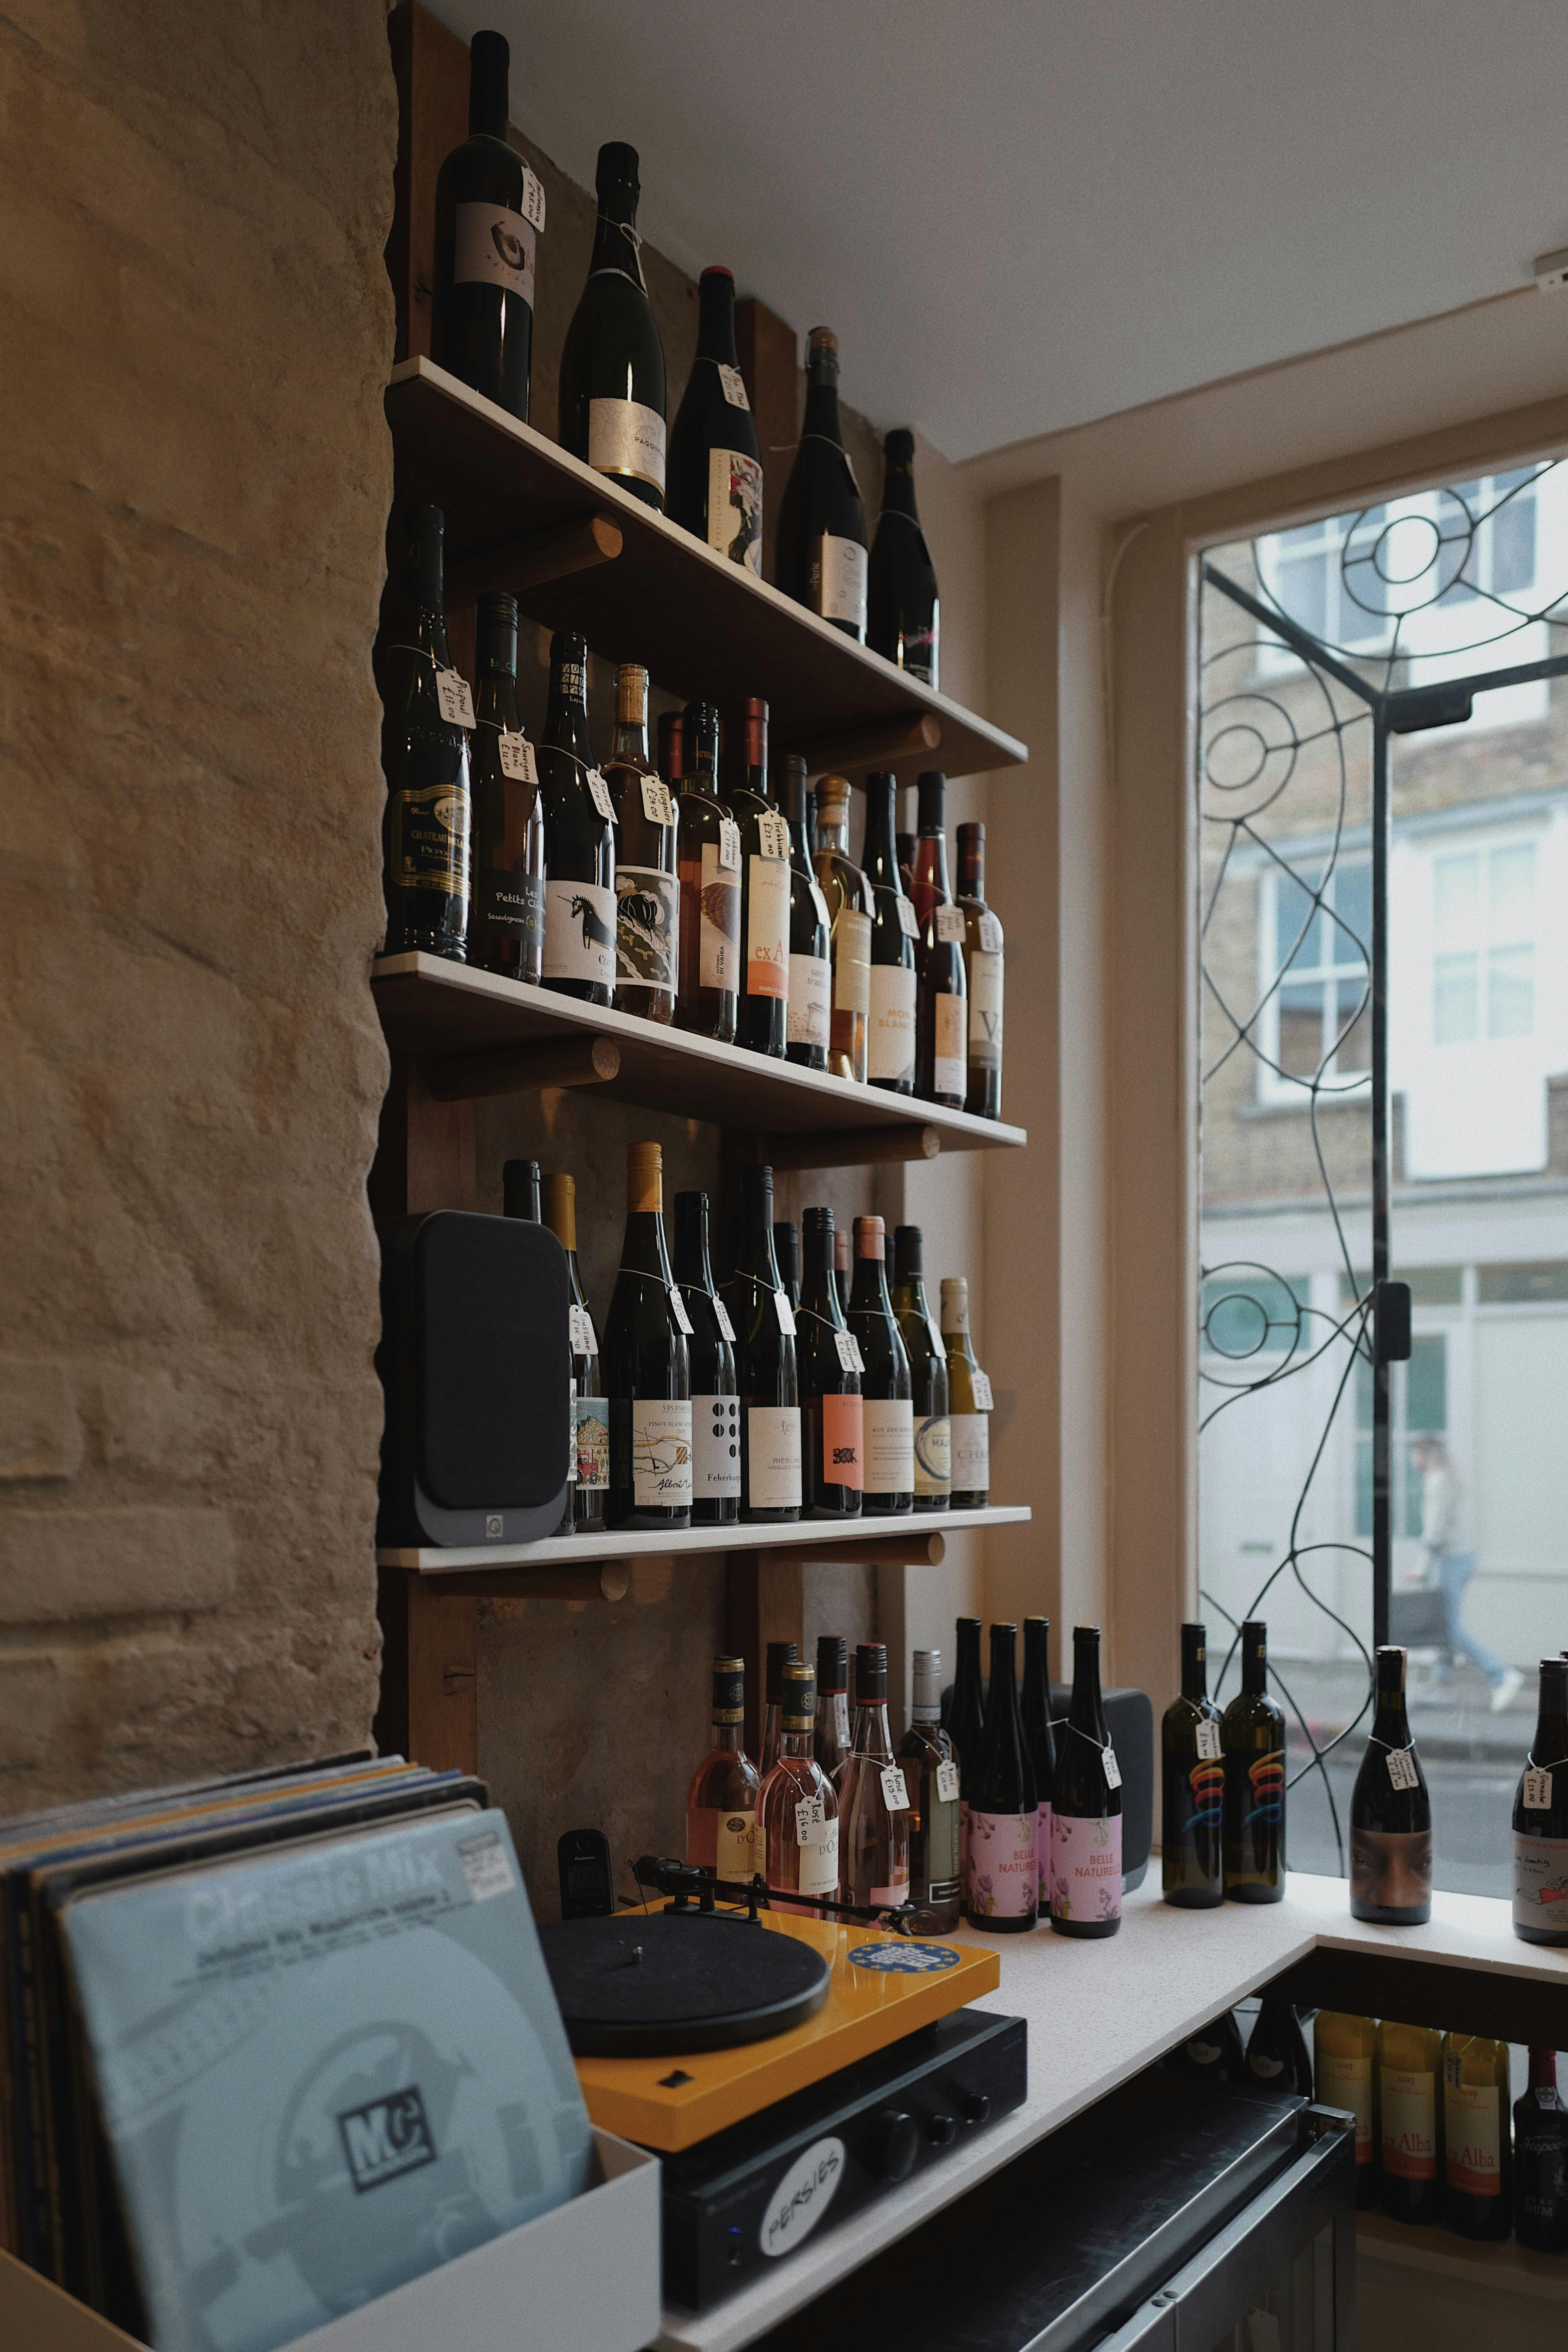 Wine Shop Photos, Download The BEST Free Wine Shop Stock Photos & HD Images